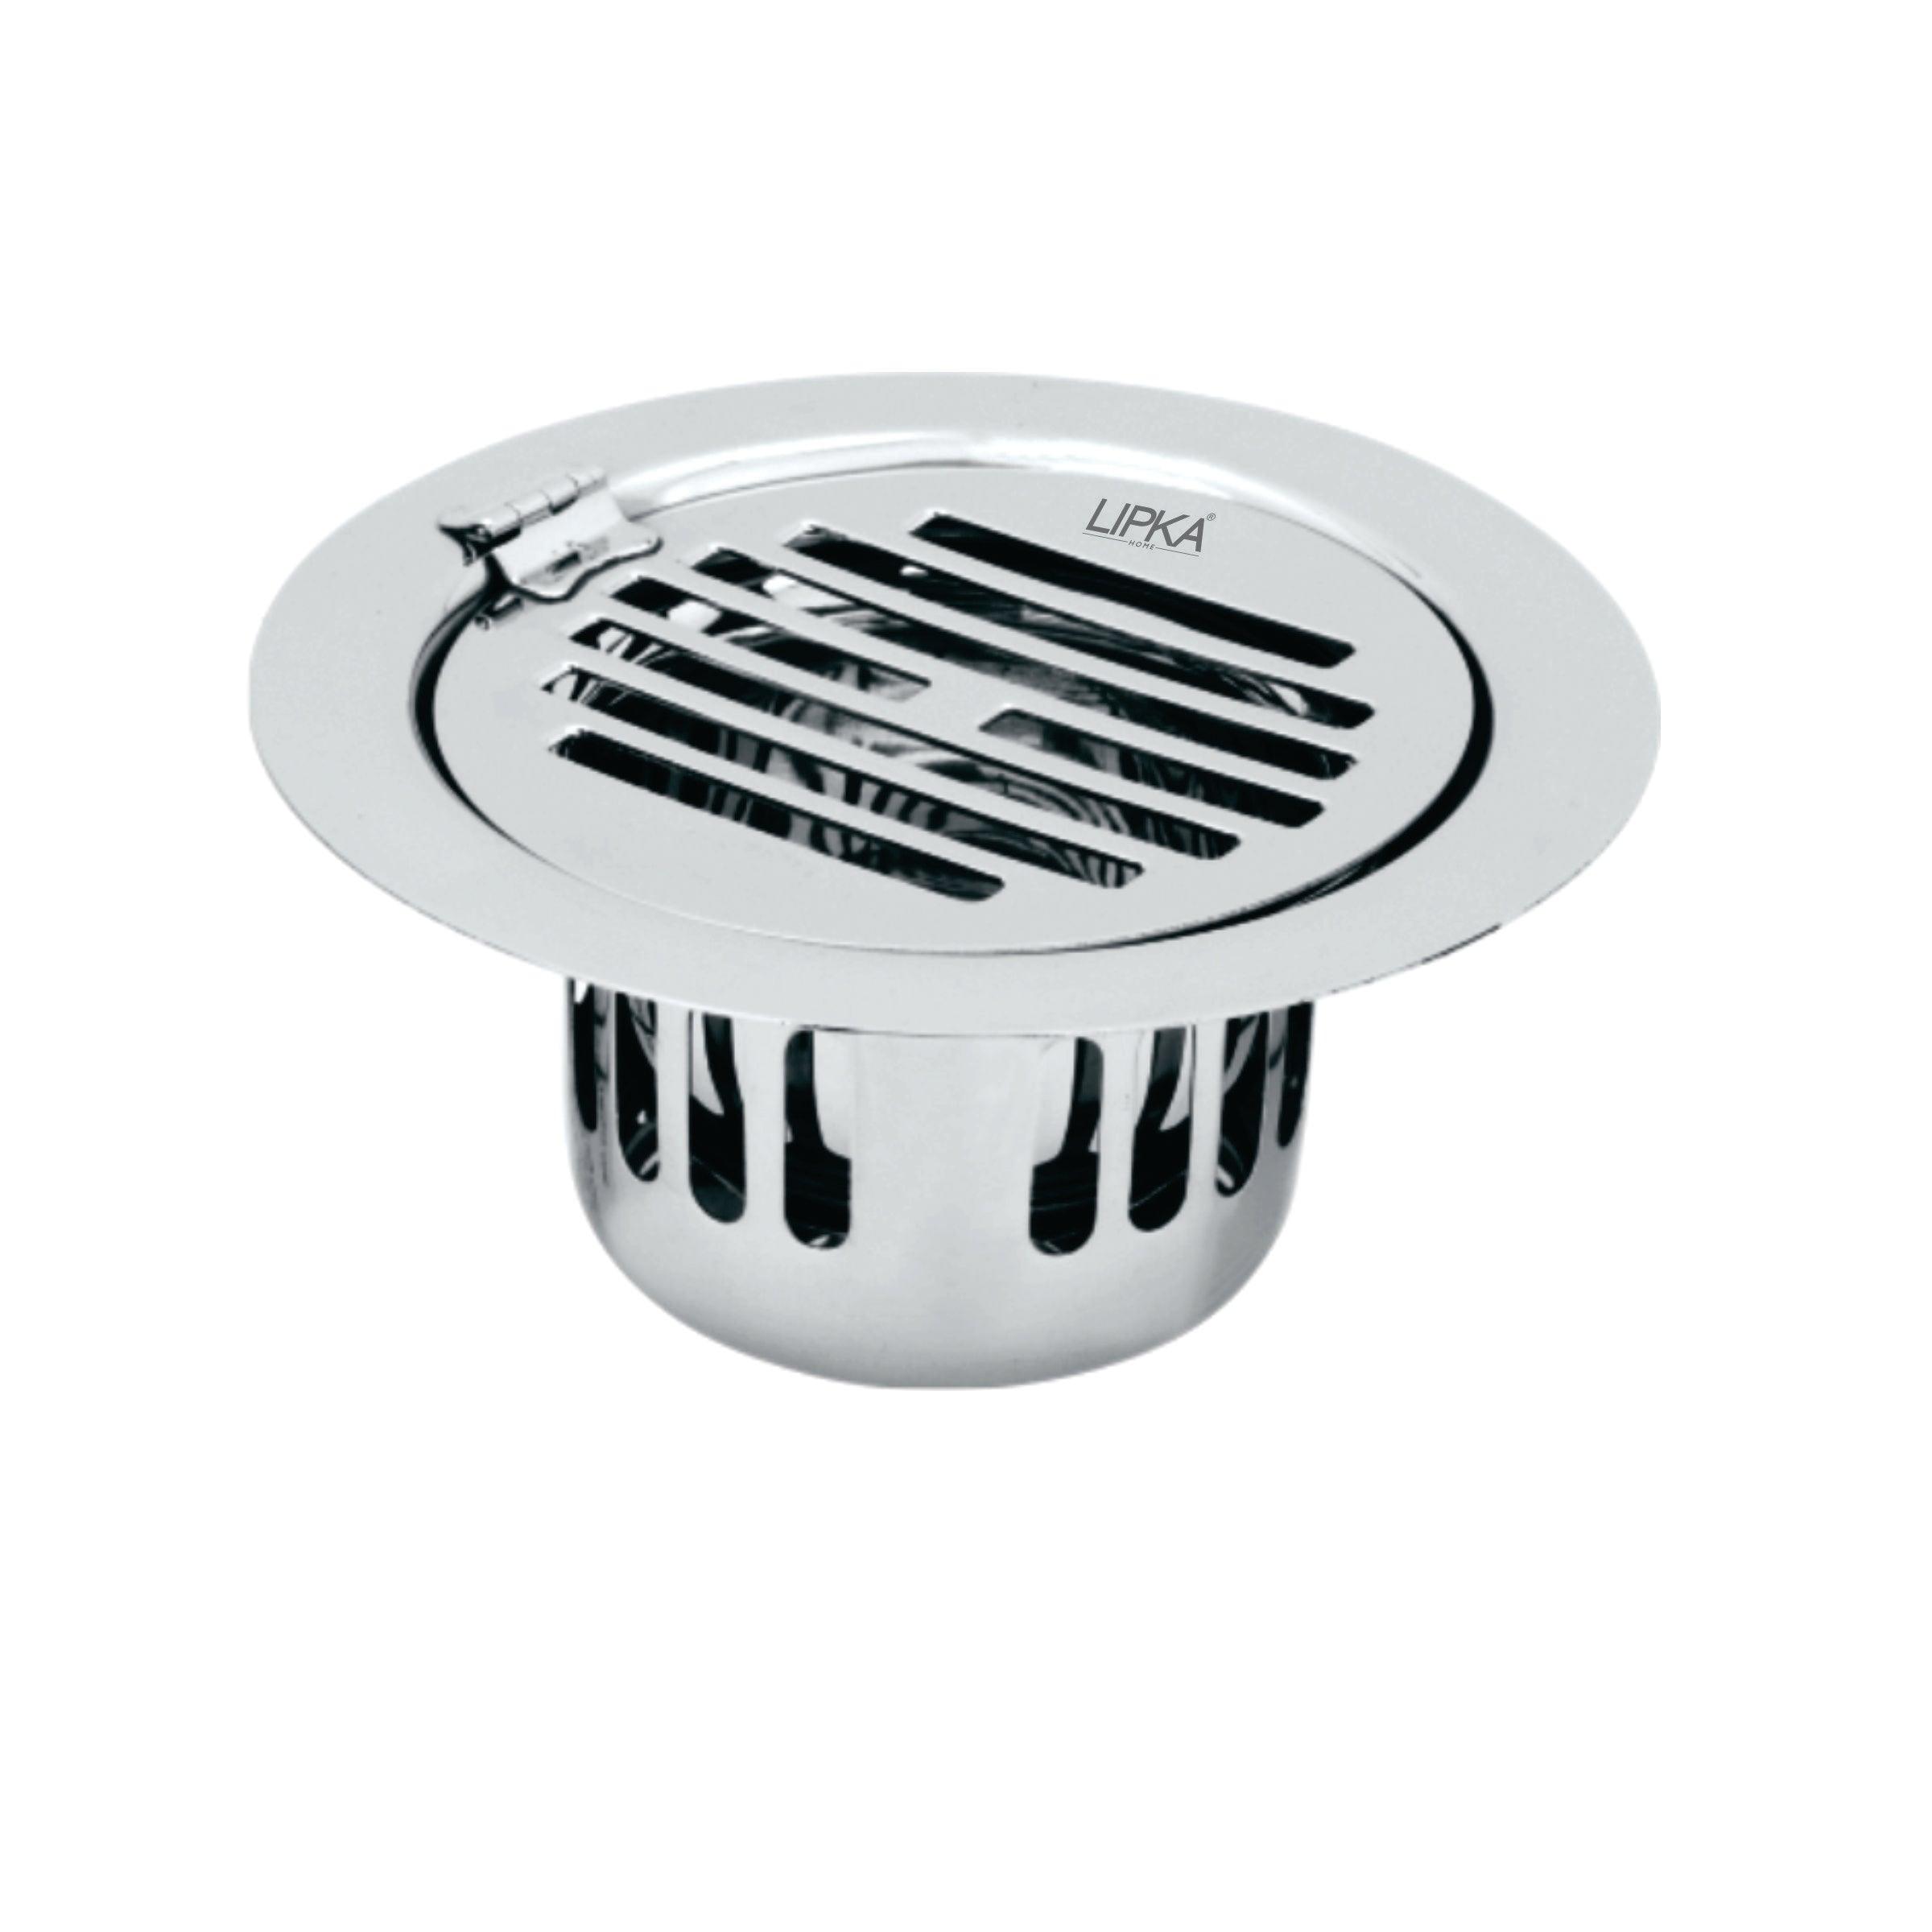 Golden Classic Jali Round Flat Cut Floor Drain (5 Inches) with Hinge and Cockroach Trap